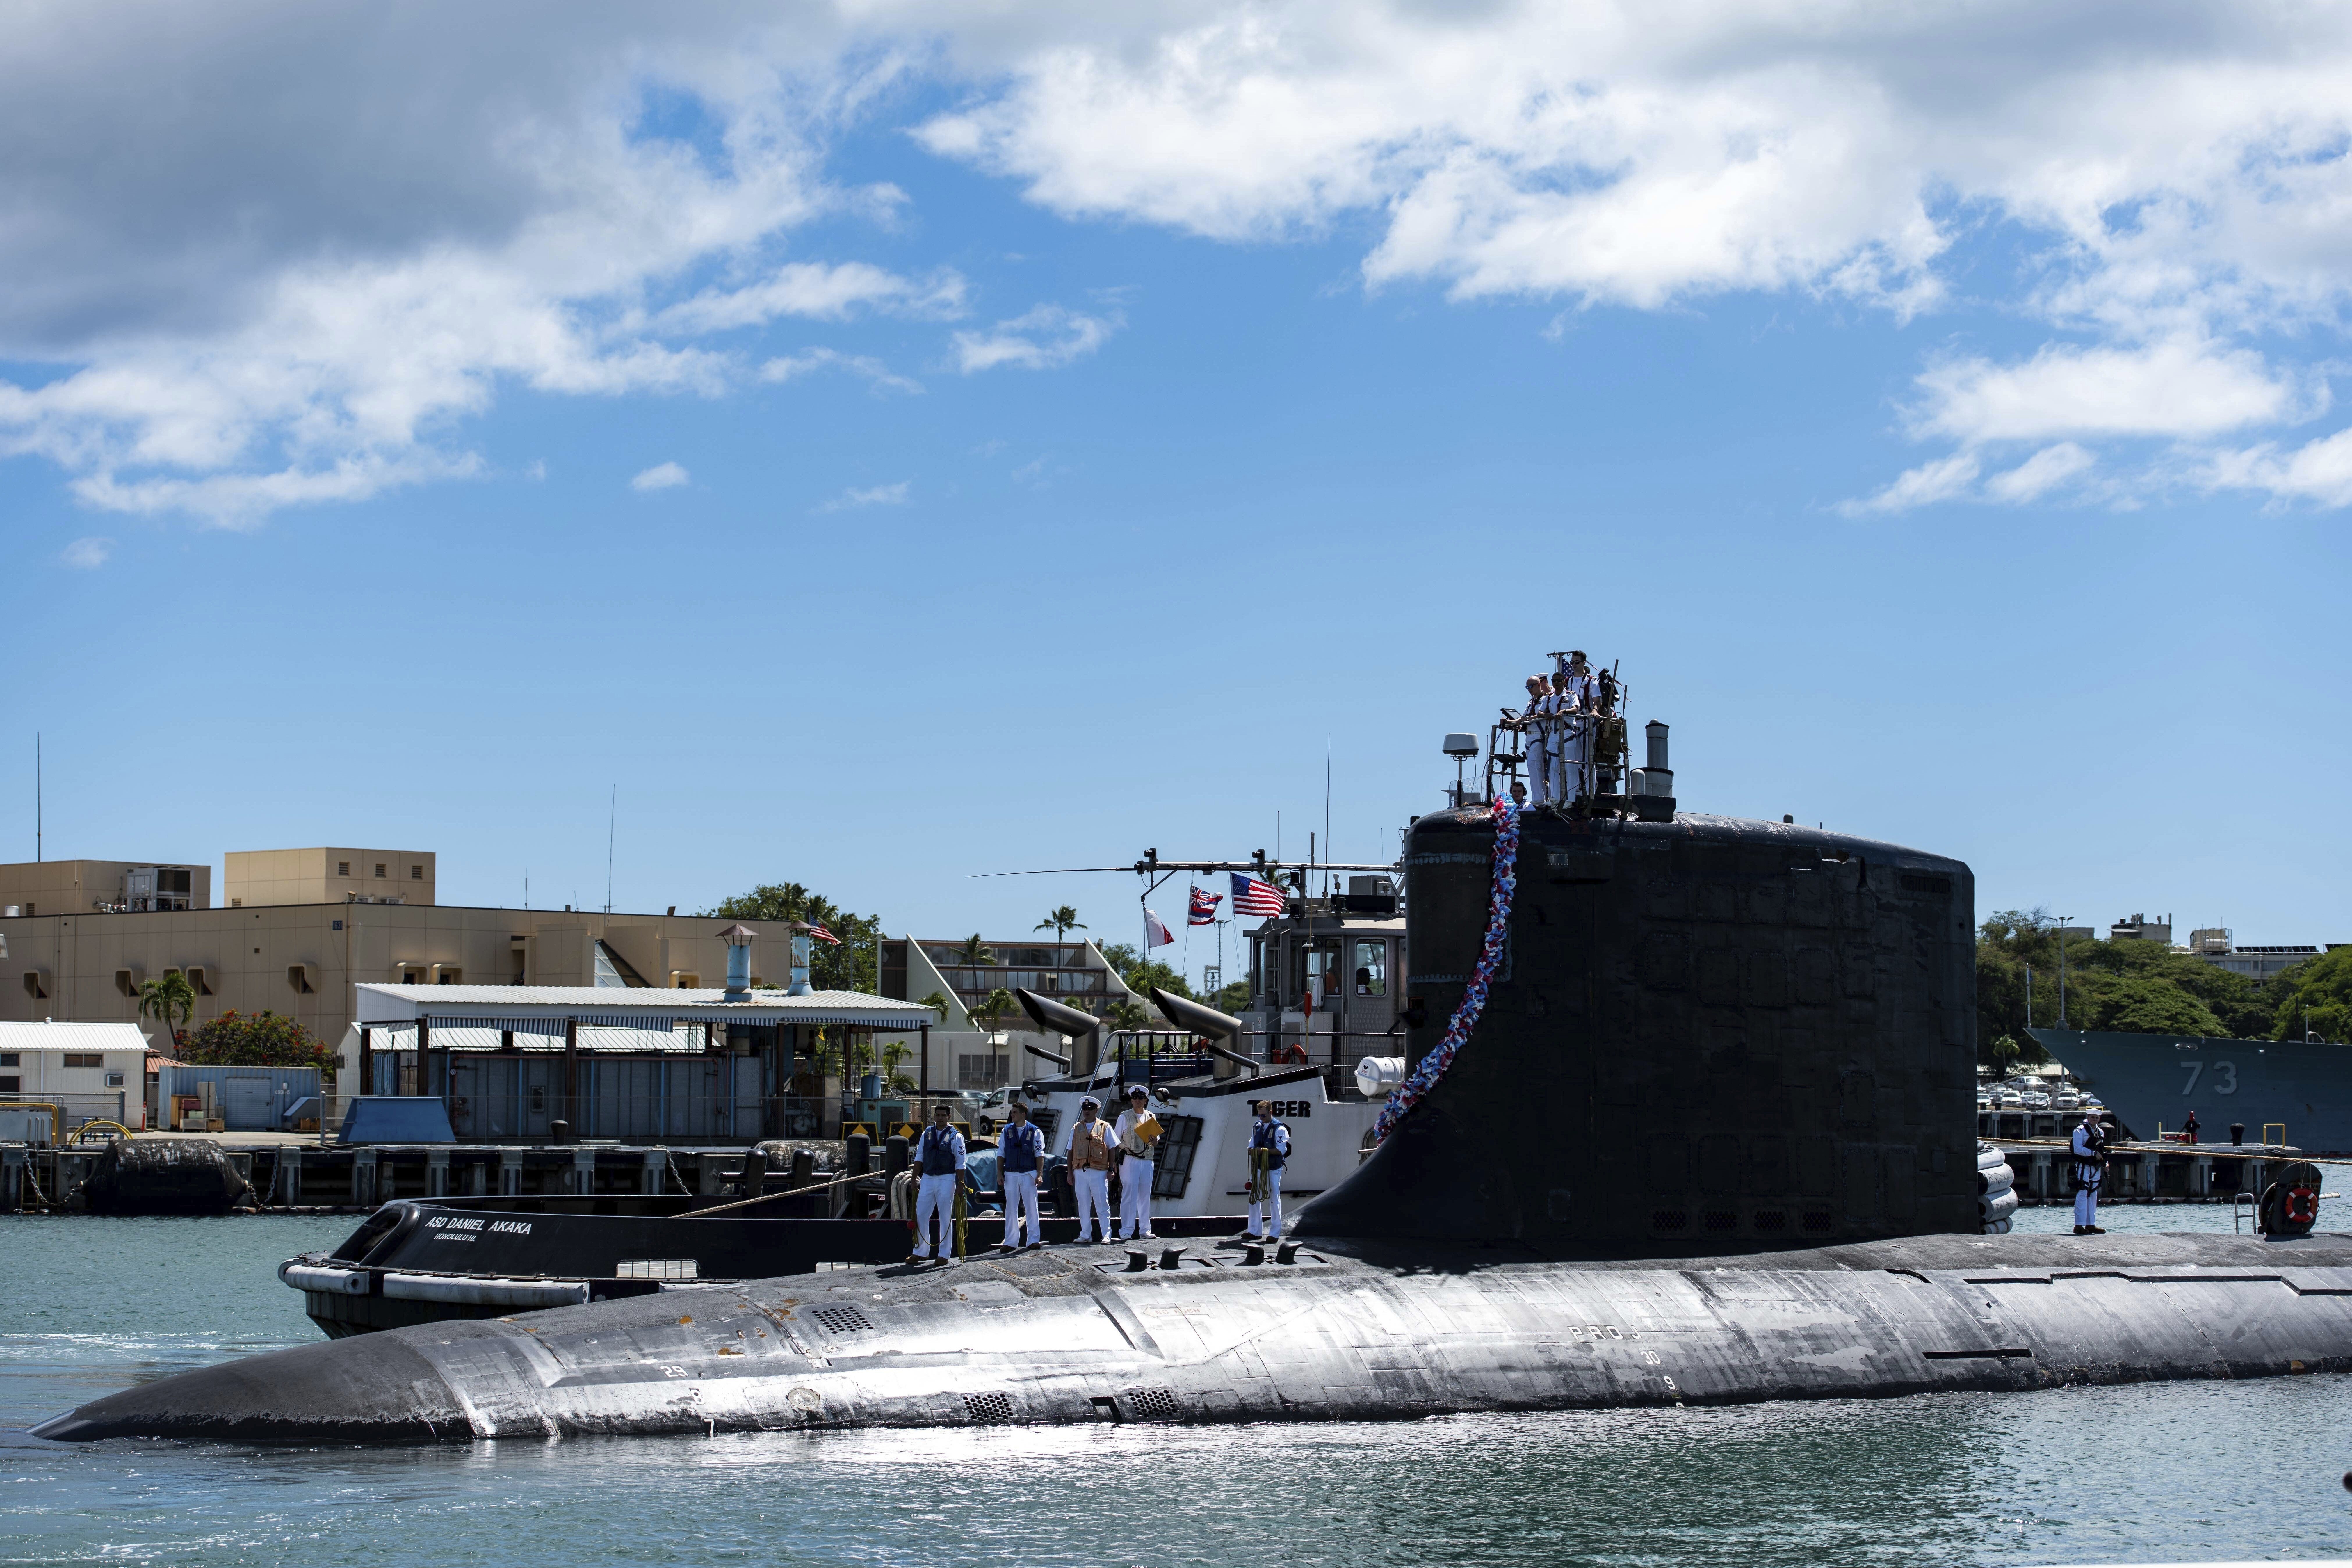 The Virginia-class fast-attack submarine USS Illinois docked at the Joint Base Pearl Harbour-Hickam. Photo: US Navy via AP